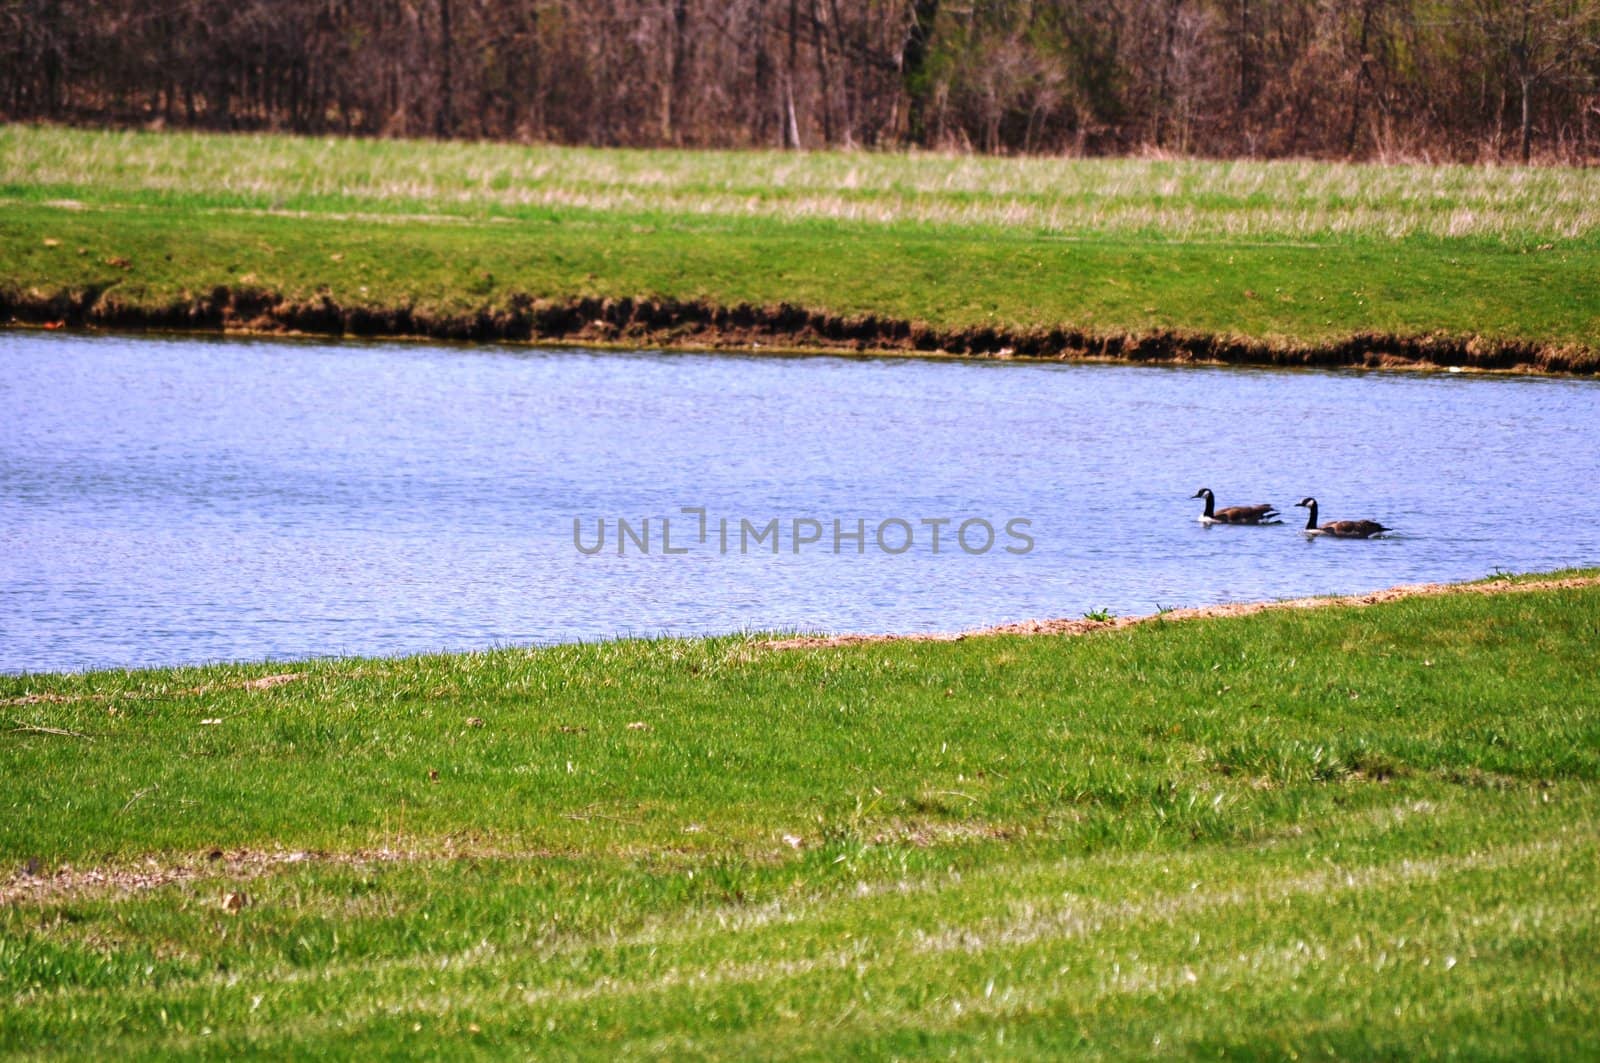 Ducks on water background by RefocusPhoto